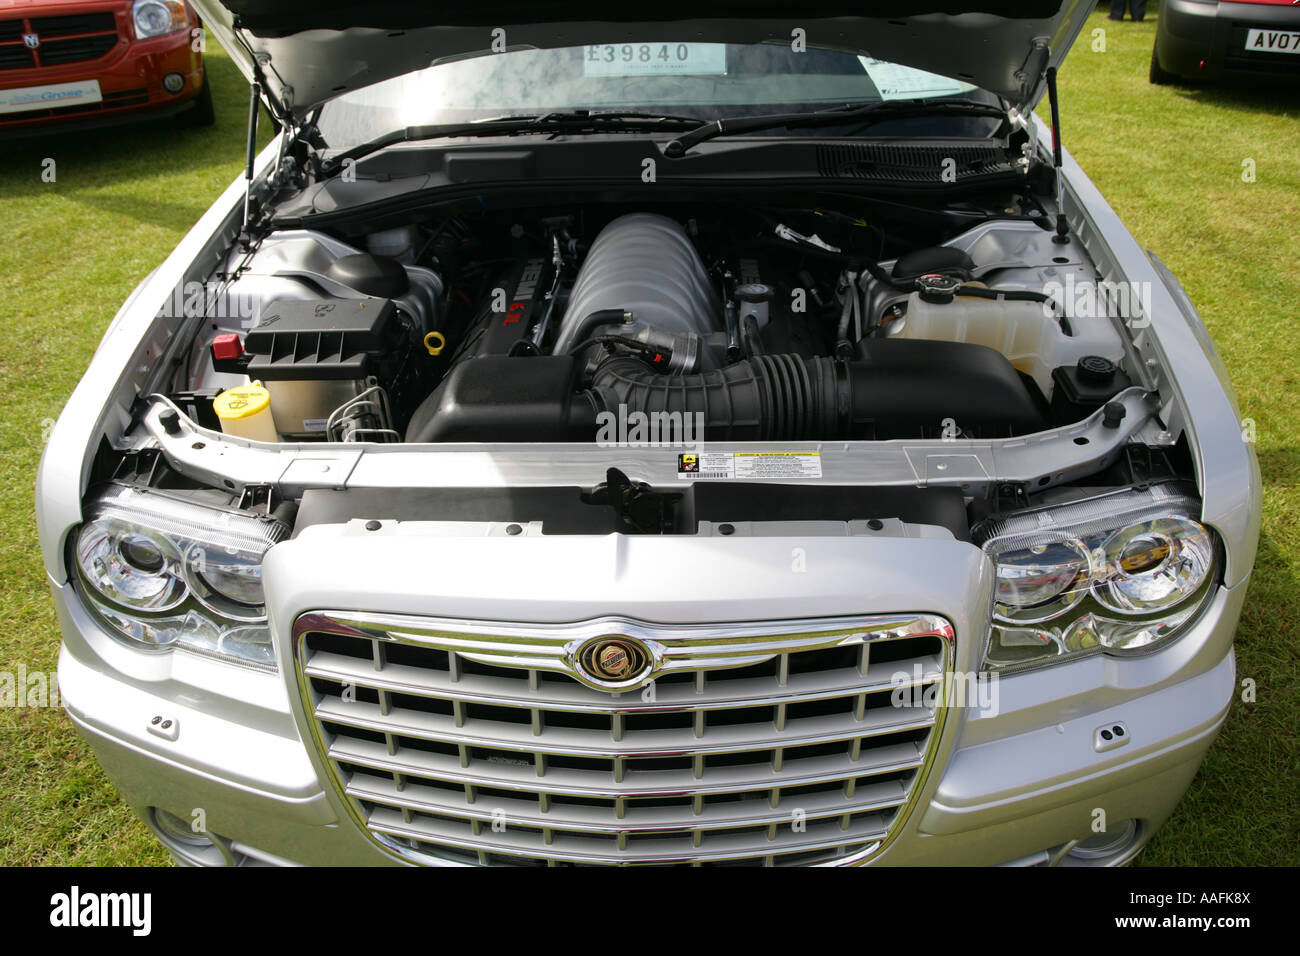 The engine bay of a Chrysler 300 CTS Hemi 6.1 liter Stock Photo